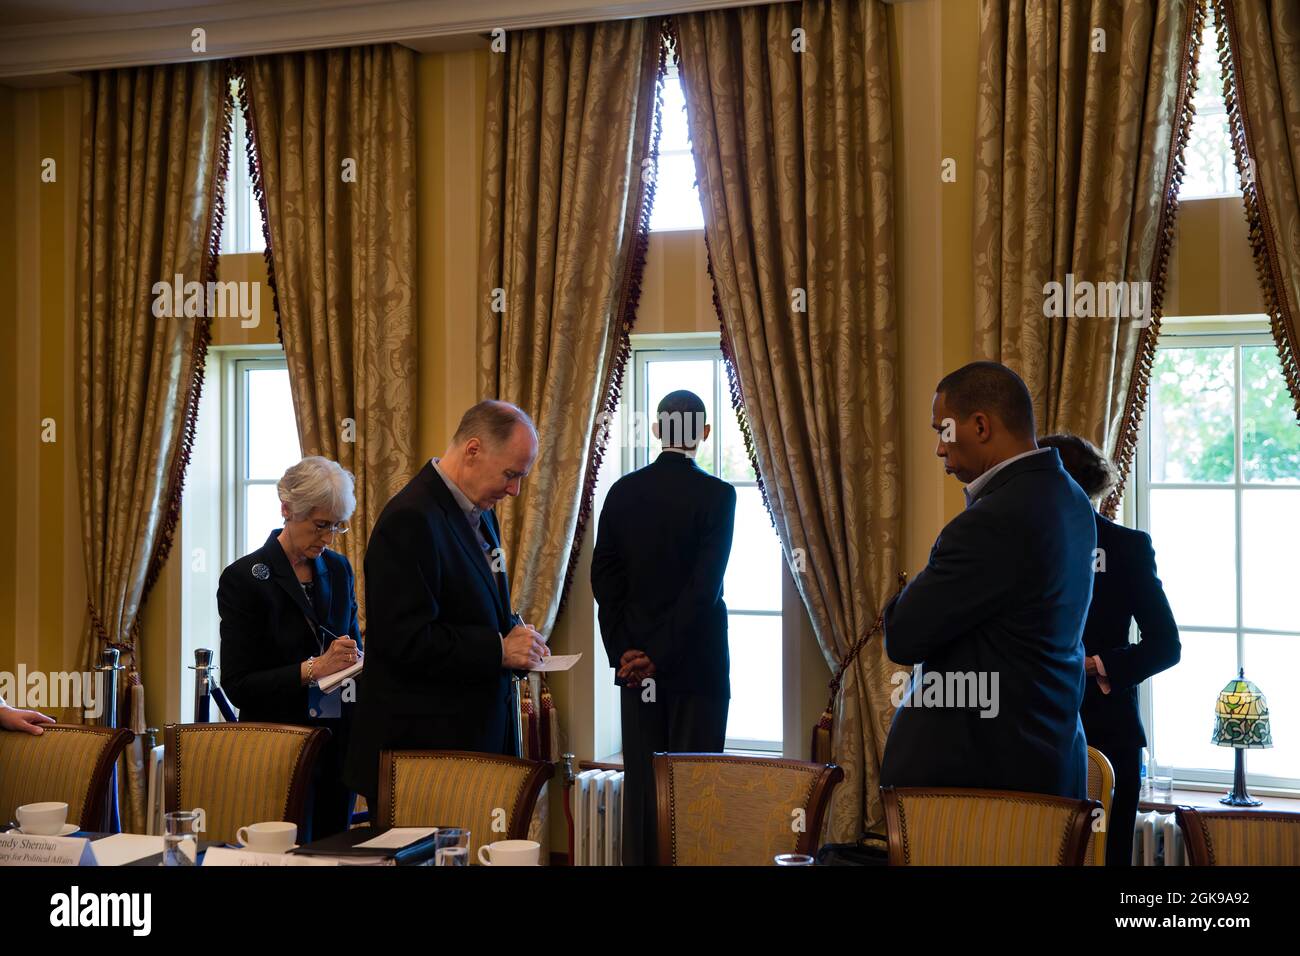 President Barack Obama waits with advisors before a bilateral meeting during the G8 Summit at the Lough Erne Resort in Enniskillen, Northern Ireland, June 18, 2013. Pictured, from left, are: Wendy Sherman, Under Secretary of State for Political Affairs; National Security Advisor Tom Donilon; President Obama; Rob Nabors, Deputy Chief of Staff for Policy; and Caroline Atkinson, Special Assistant to the President for International Economic Affairs. (Official White House Photo by Pete Souza)  This official White House photograph is being made available only for publication by news organizations an Stock Photo